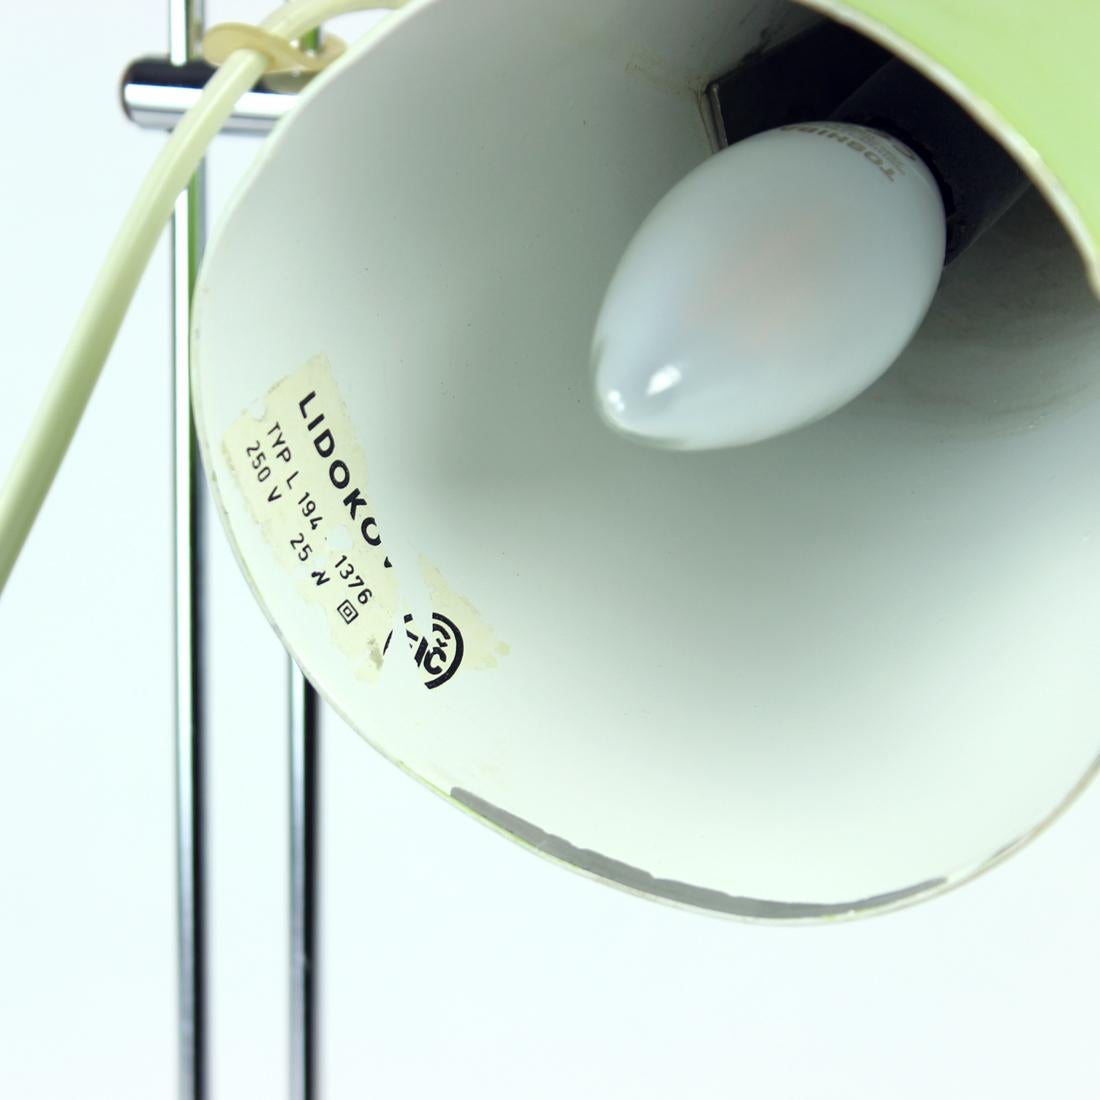 Green Metal Table Lamp by Lidokov, Czechoslovakia 1960s For Sale 5